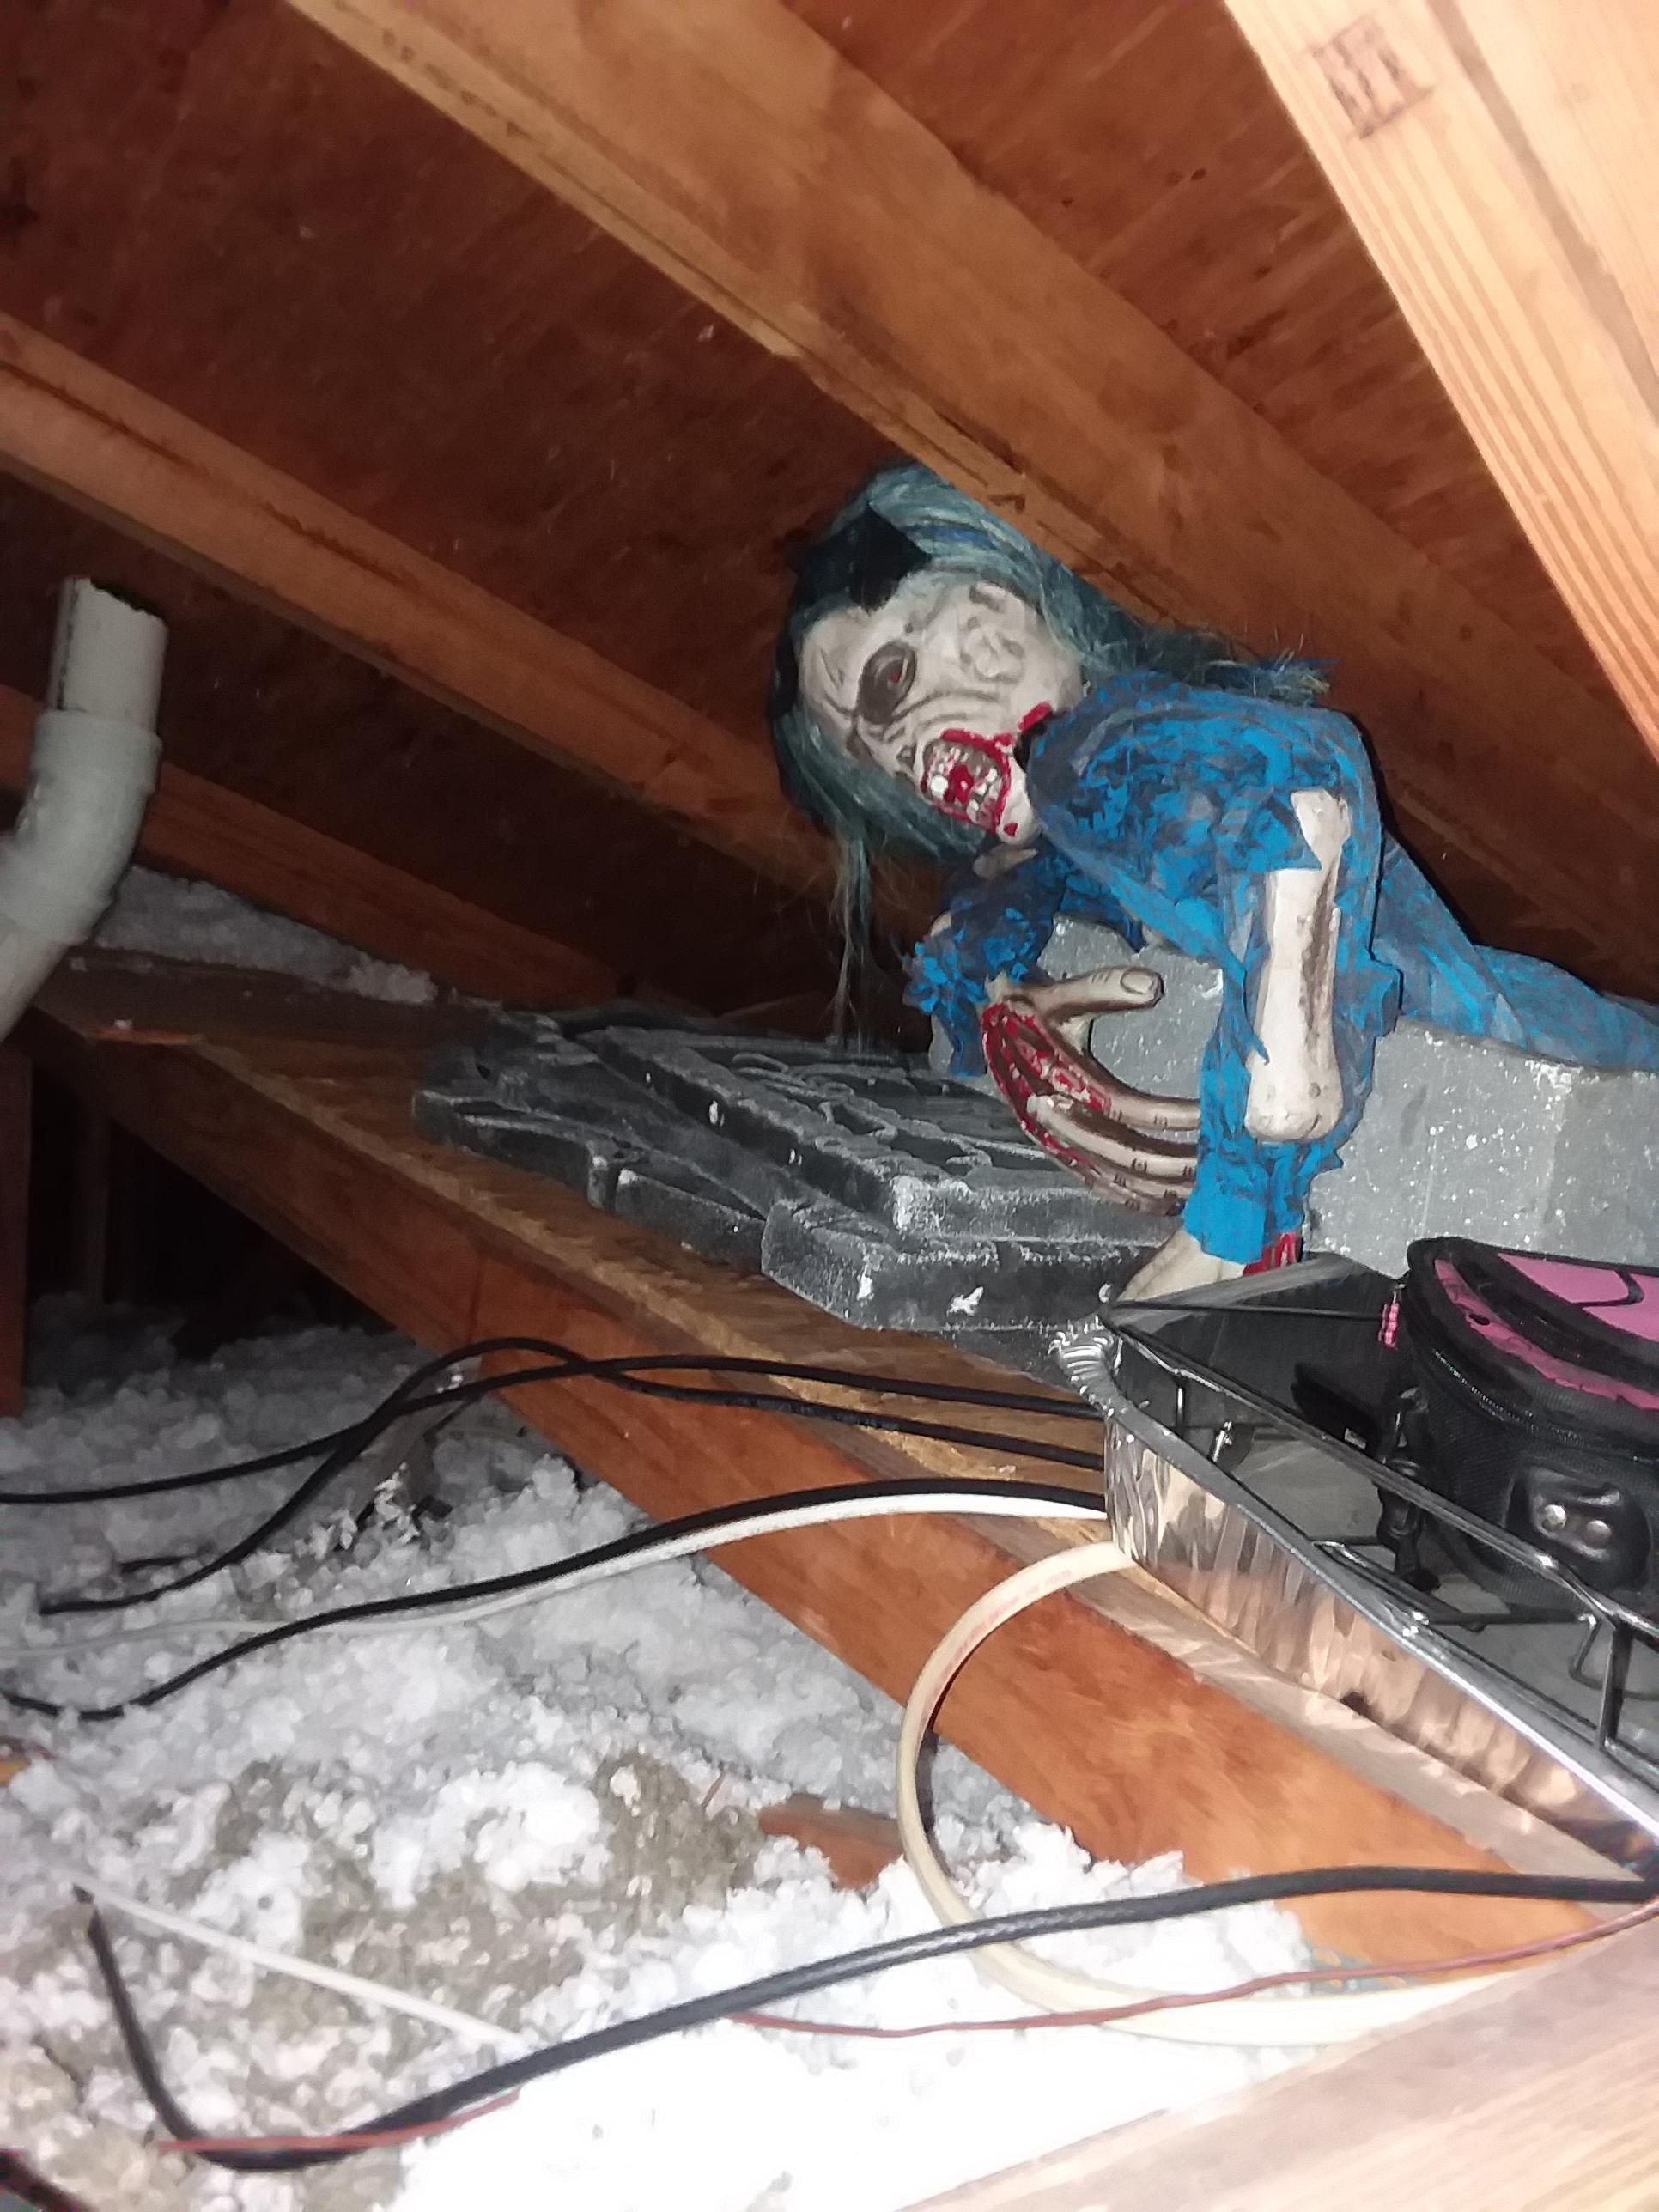 So I go into my girl's attic to get Christmas decorations, and I'm met with this.